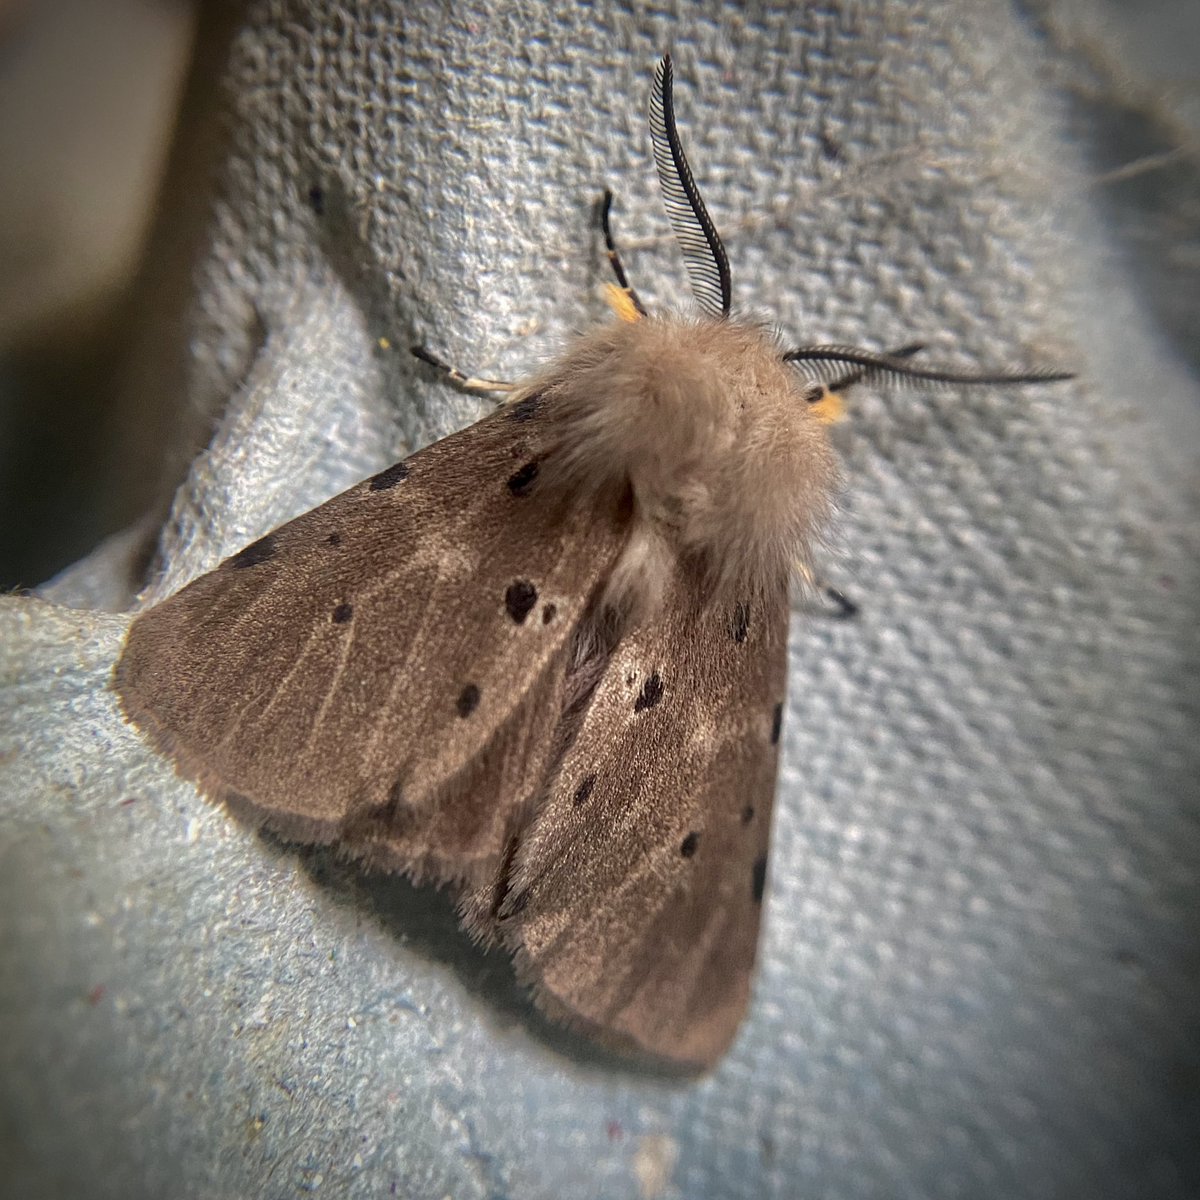 Lots of Muslin Moths in the #mothtrap the other night. Diaphora mendica.